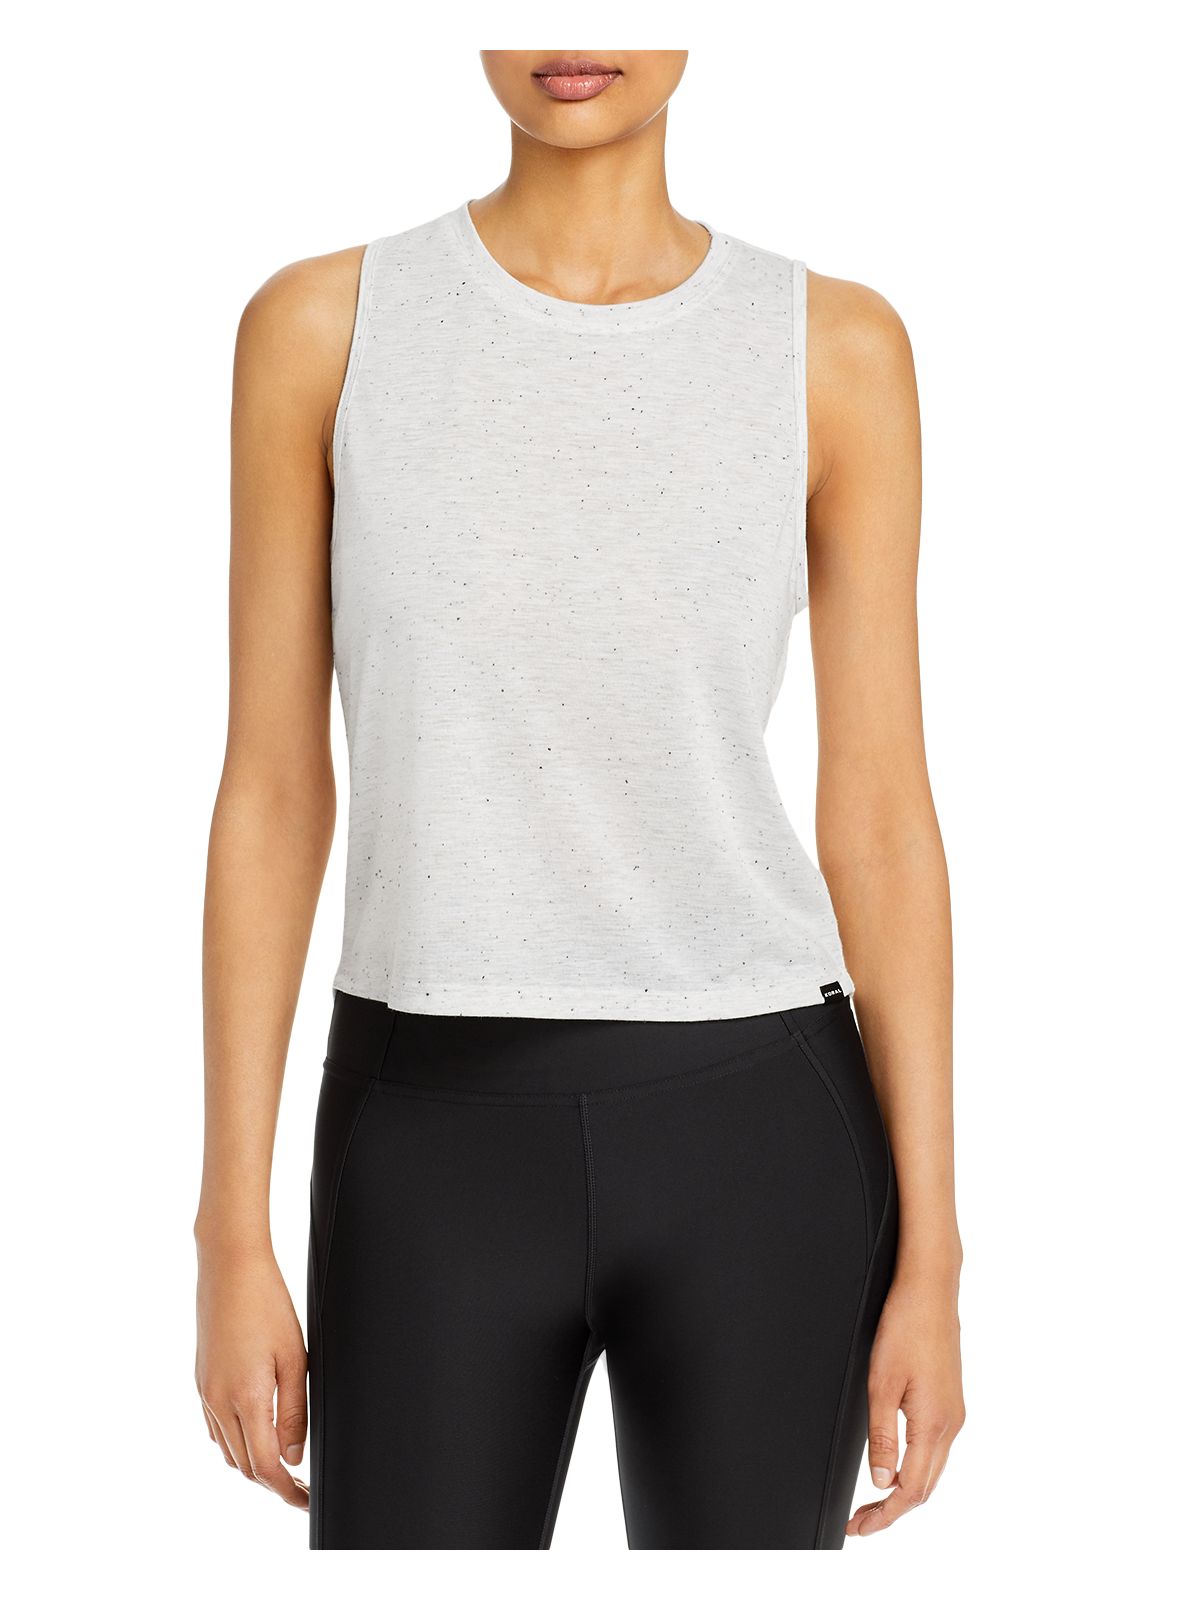 KORAL Womens Textured Relaxed Fit Sleeveless Crew Neck Tank Top